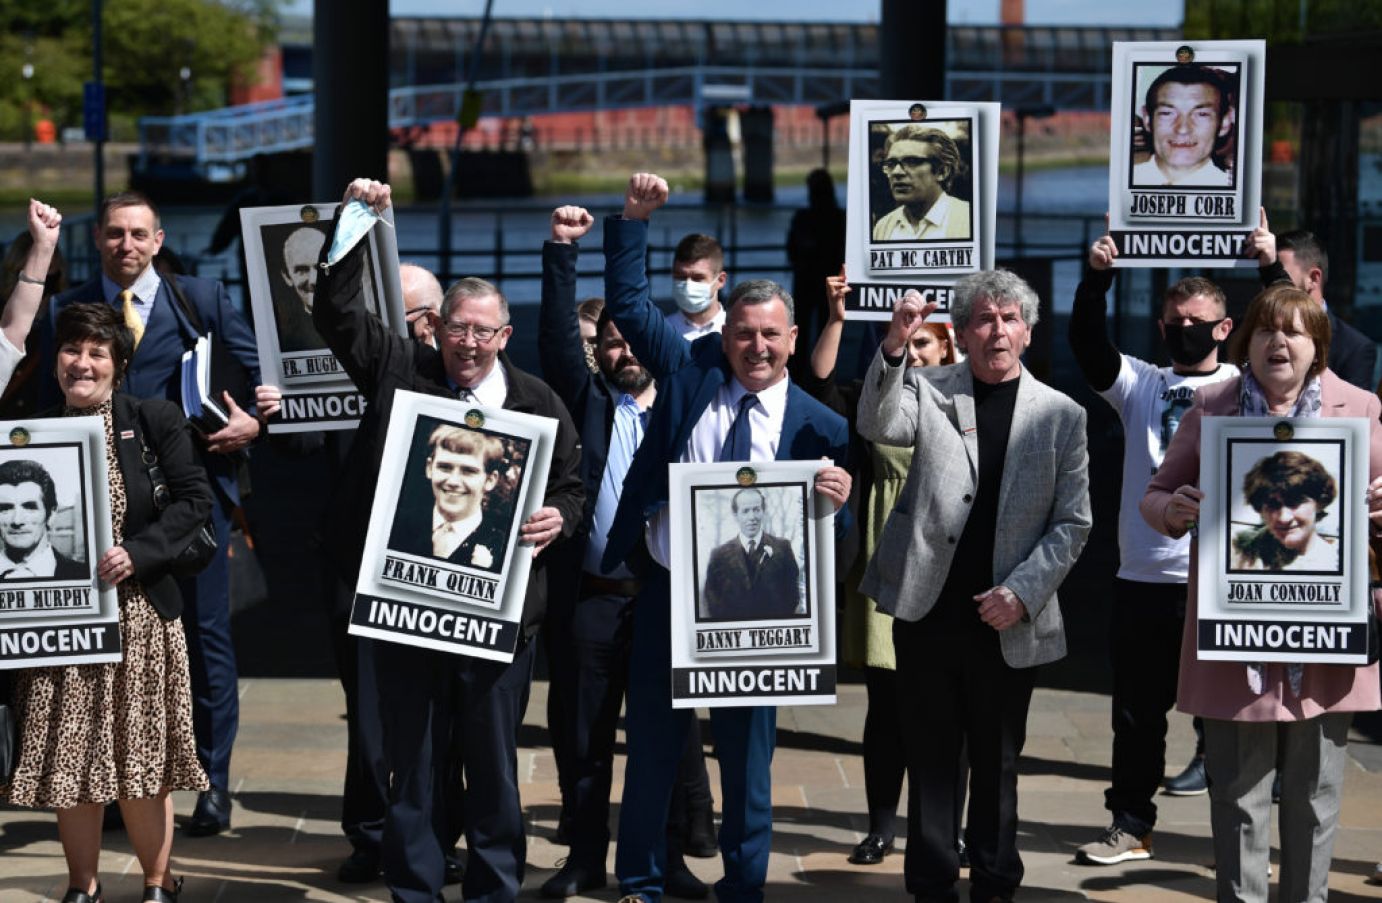 Relatives Of Victims After The Findings Of The Ballymurphy Inquest Were Released By The Coroner In Belfast. The Inquest, Which Began In November 2018, Examined The Deaths Of 10 Civilians Who Were Shot And Fatally Injured By Soldiers In And Around The Ballymurphy Area Of West Belfast In August 1971. Photo: Charles Mcquillan/Getty